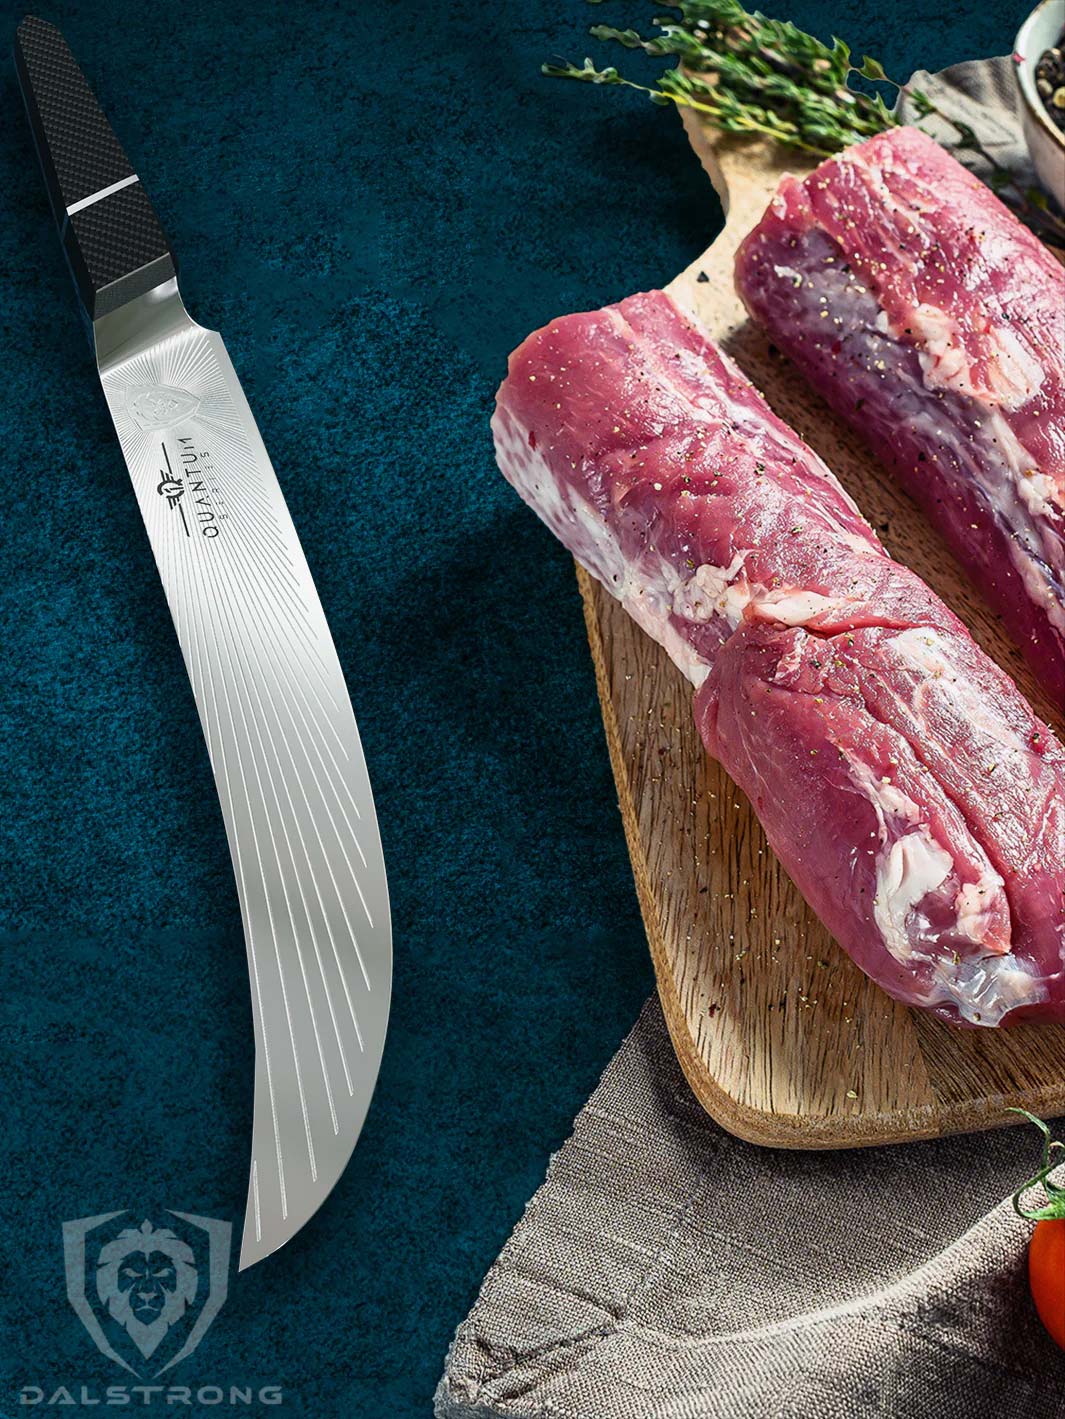 Dalstrong quantum 1 series 10 inch butcher knife with dragon skin handle and two cuts of loin on a cutting board.